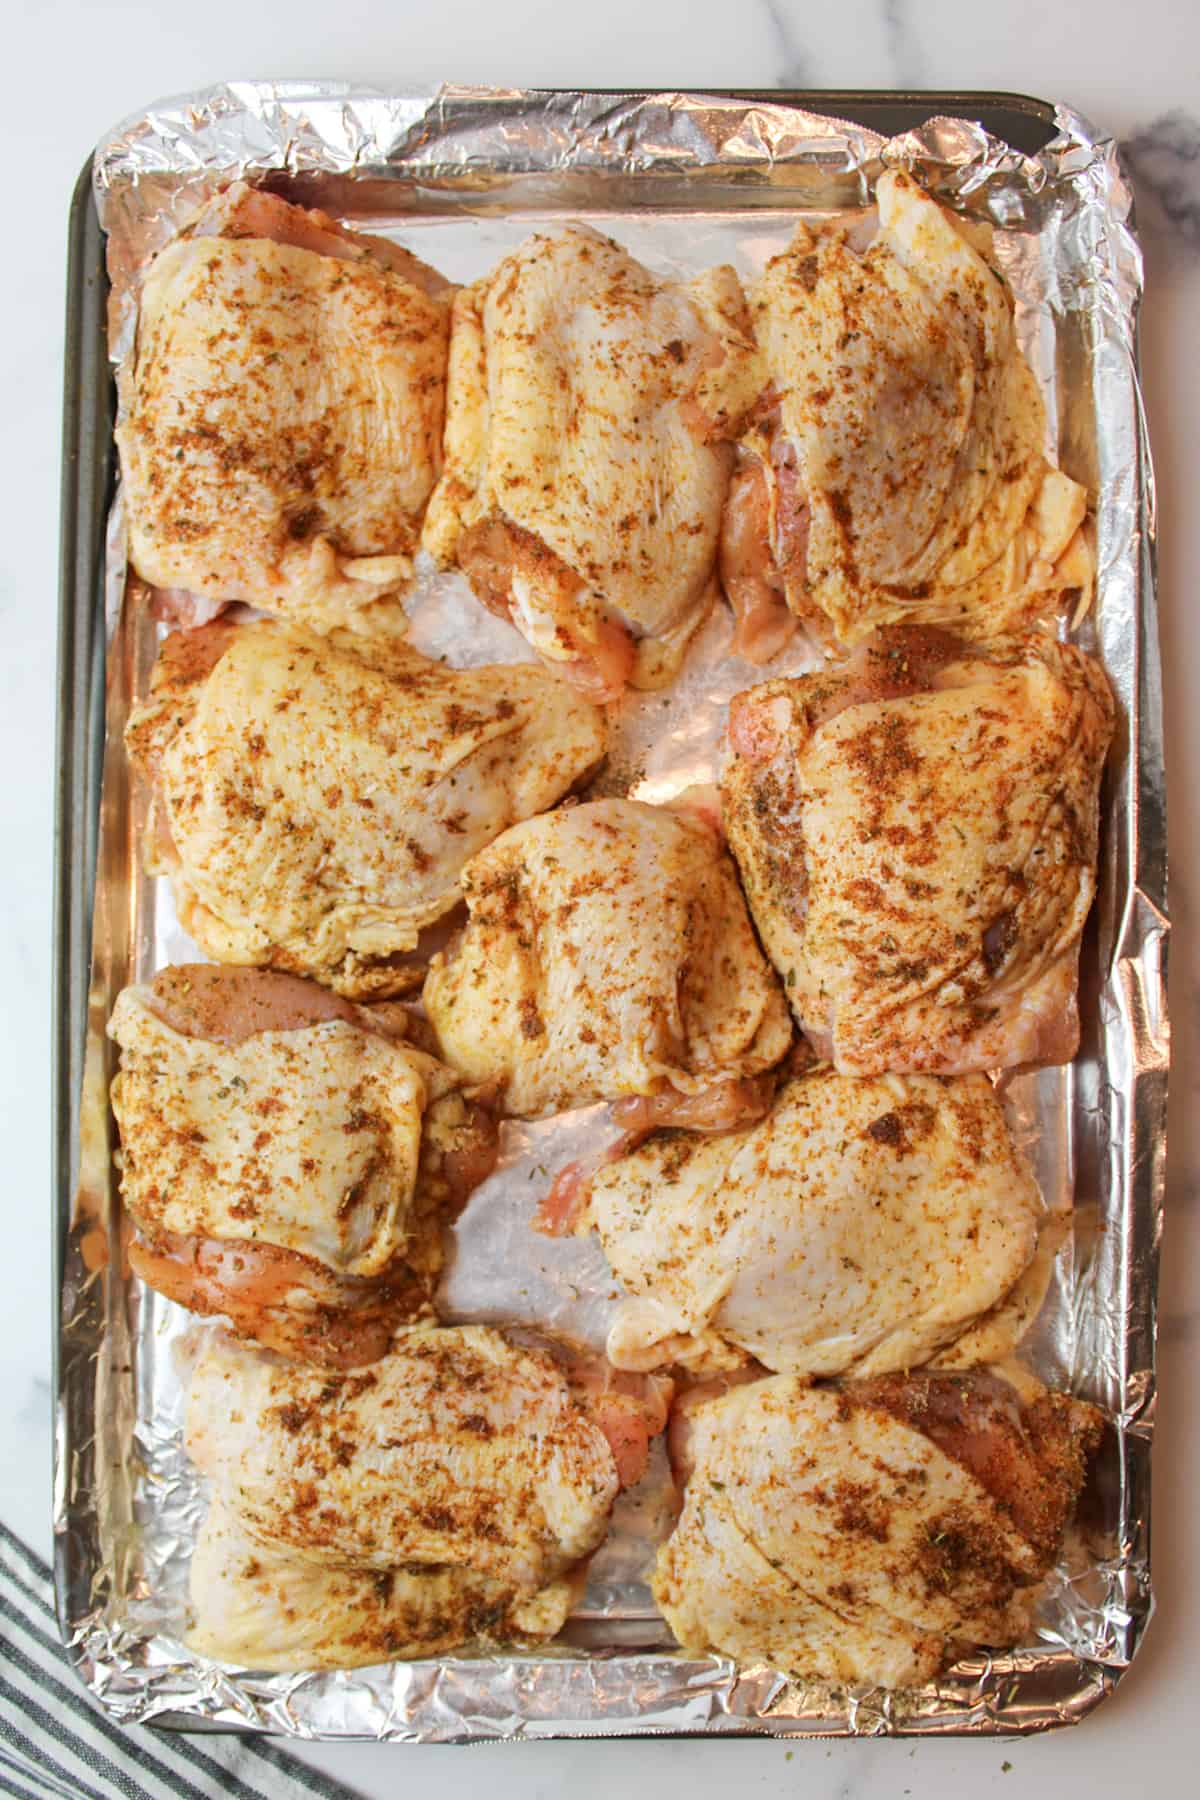 seasoning covered chicken thighs on a foil lined baking sheet.